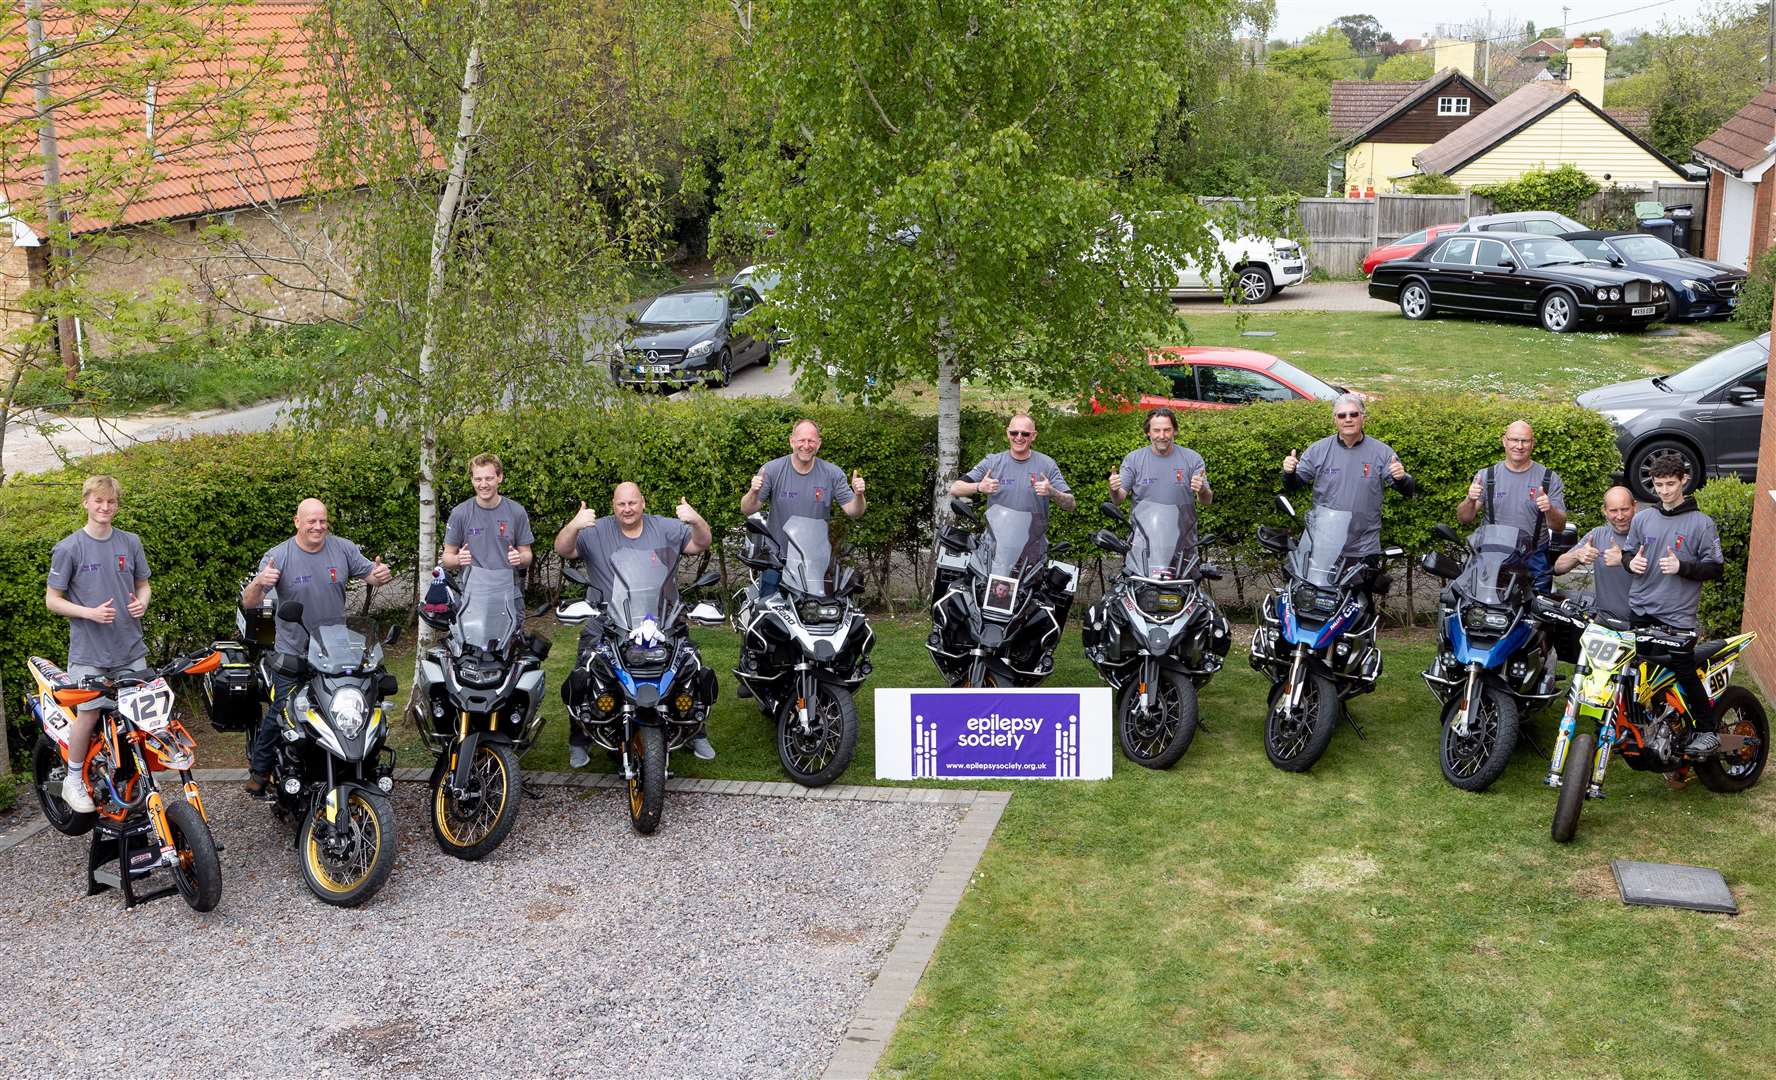 The bikers fundraising for the Epilepsy Society and sponsored by Bay Embroidery, Rose in Bloom and Volopa. Picture: Paul Smith